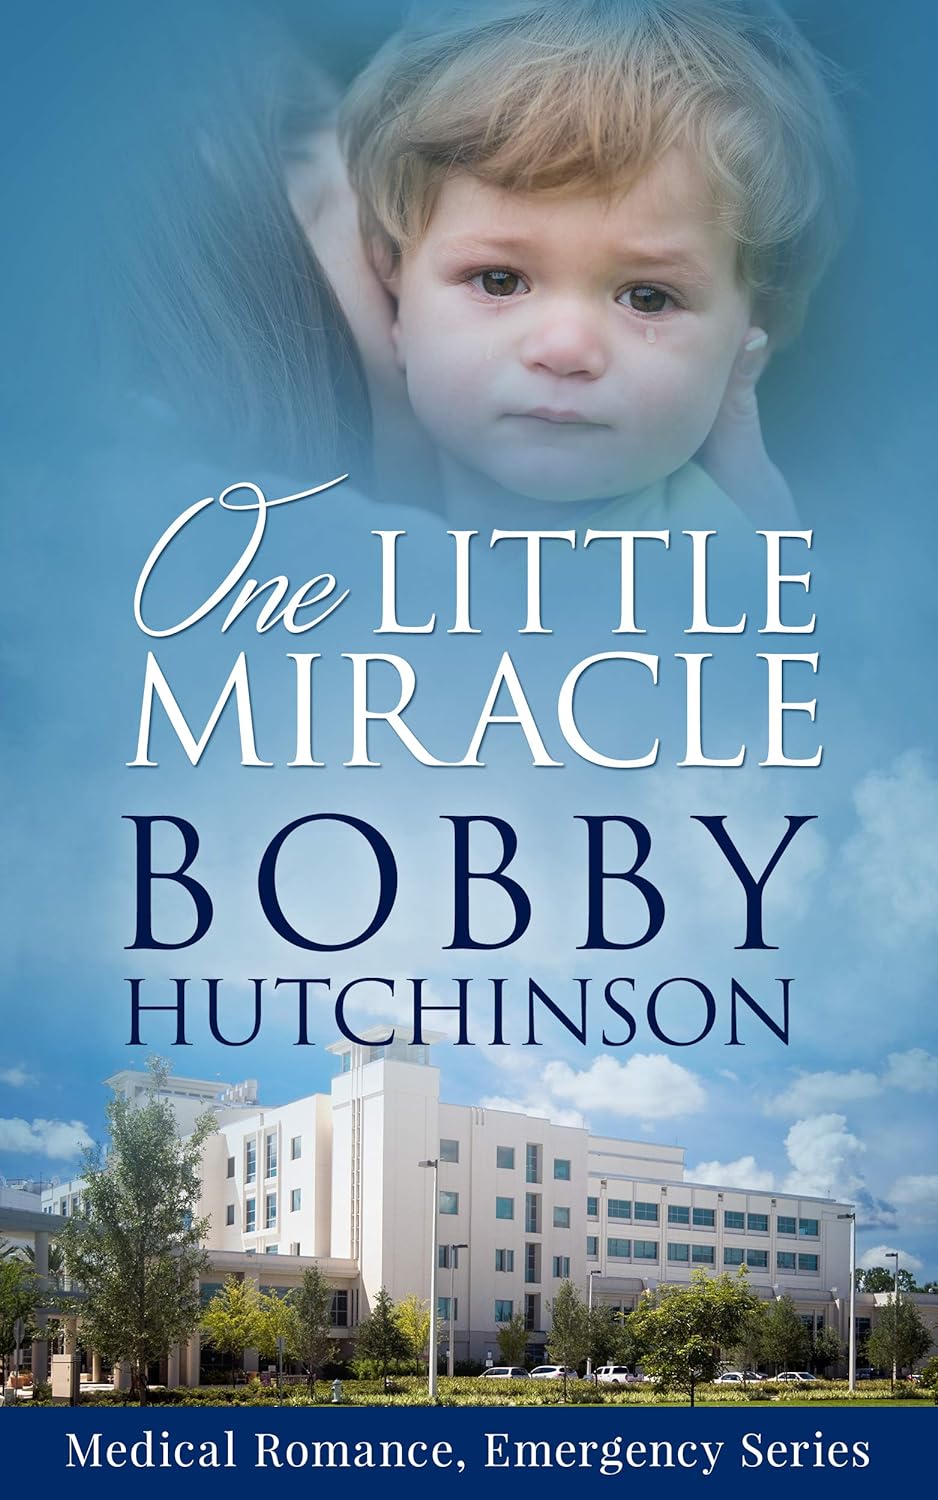 One Little Miracle by Bobby Hutchinson